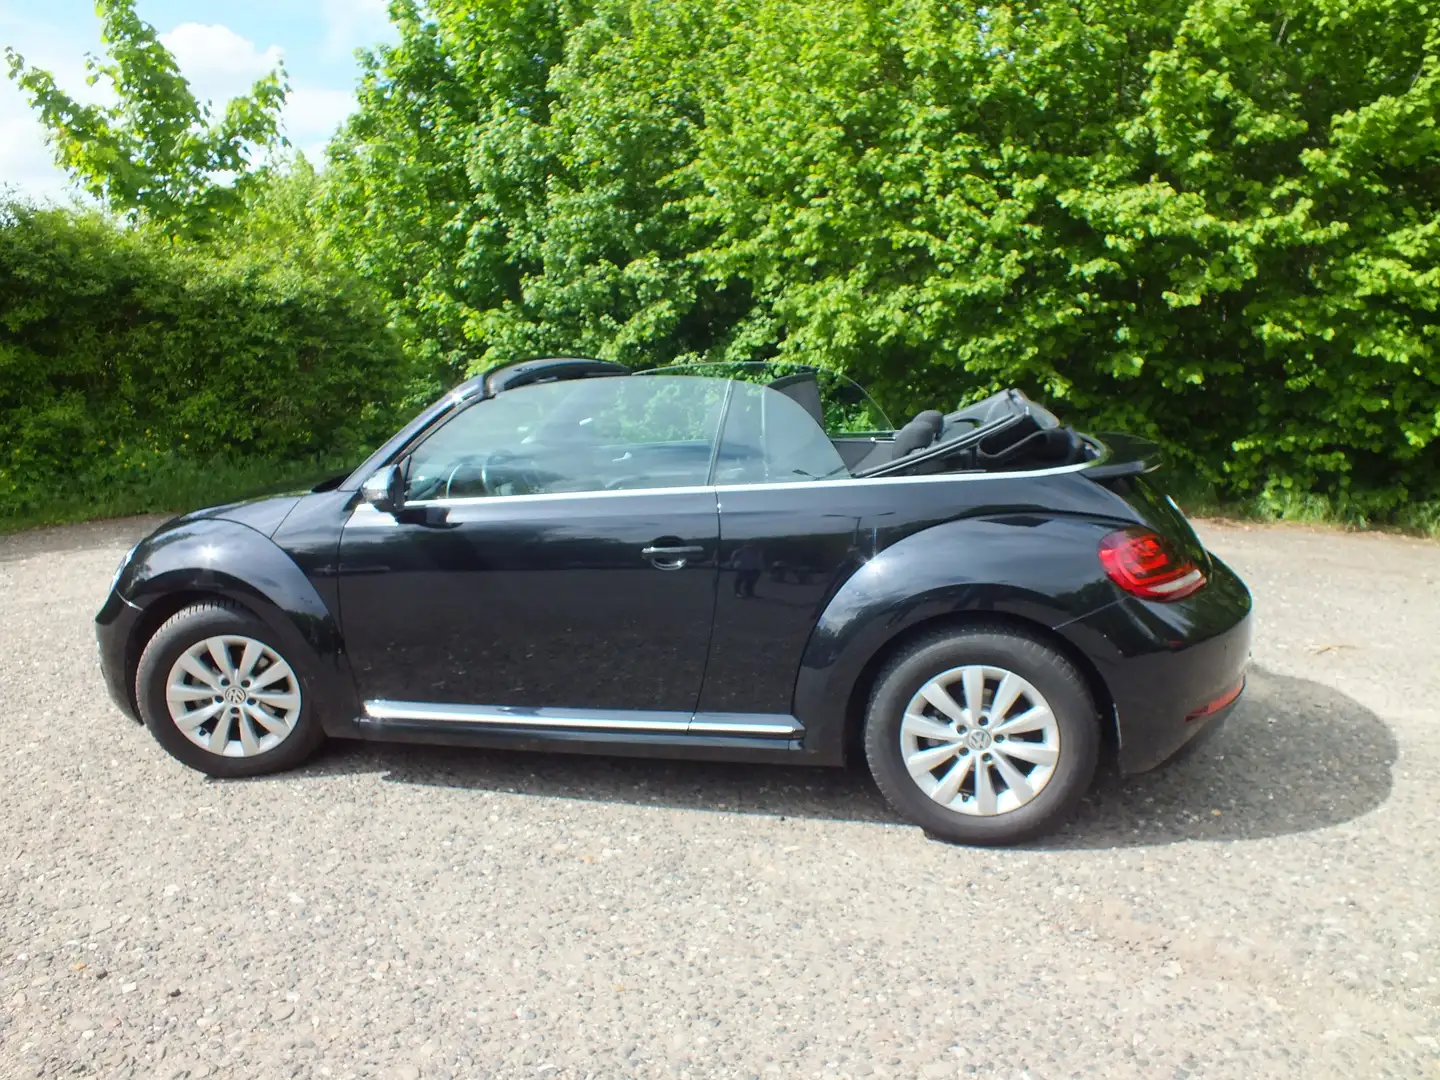 Volkswagen Beetle The Beetle Cabriolet 1.2 TSI (BlueMotion Tech) Sou crna - 1